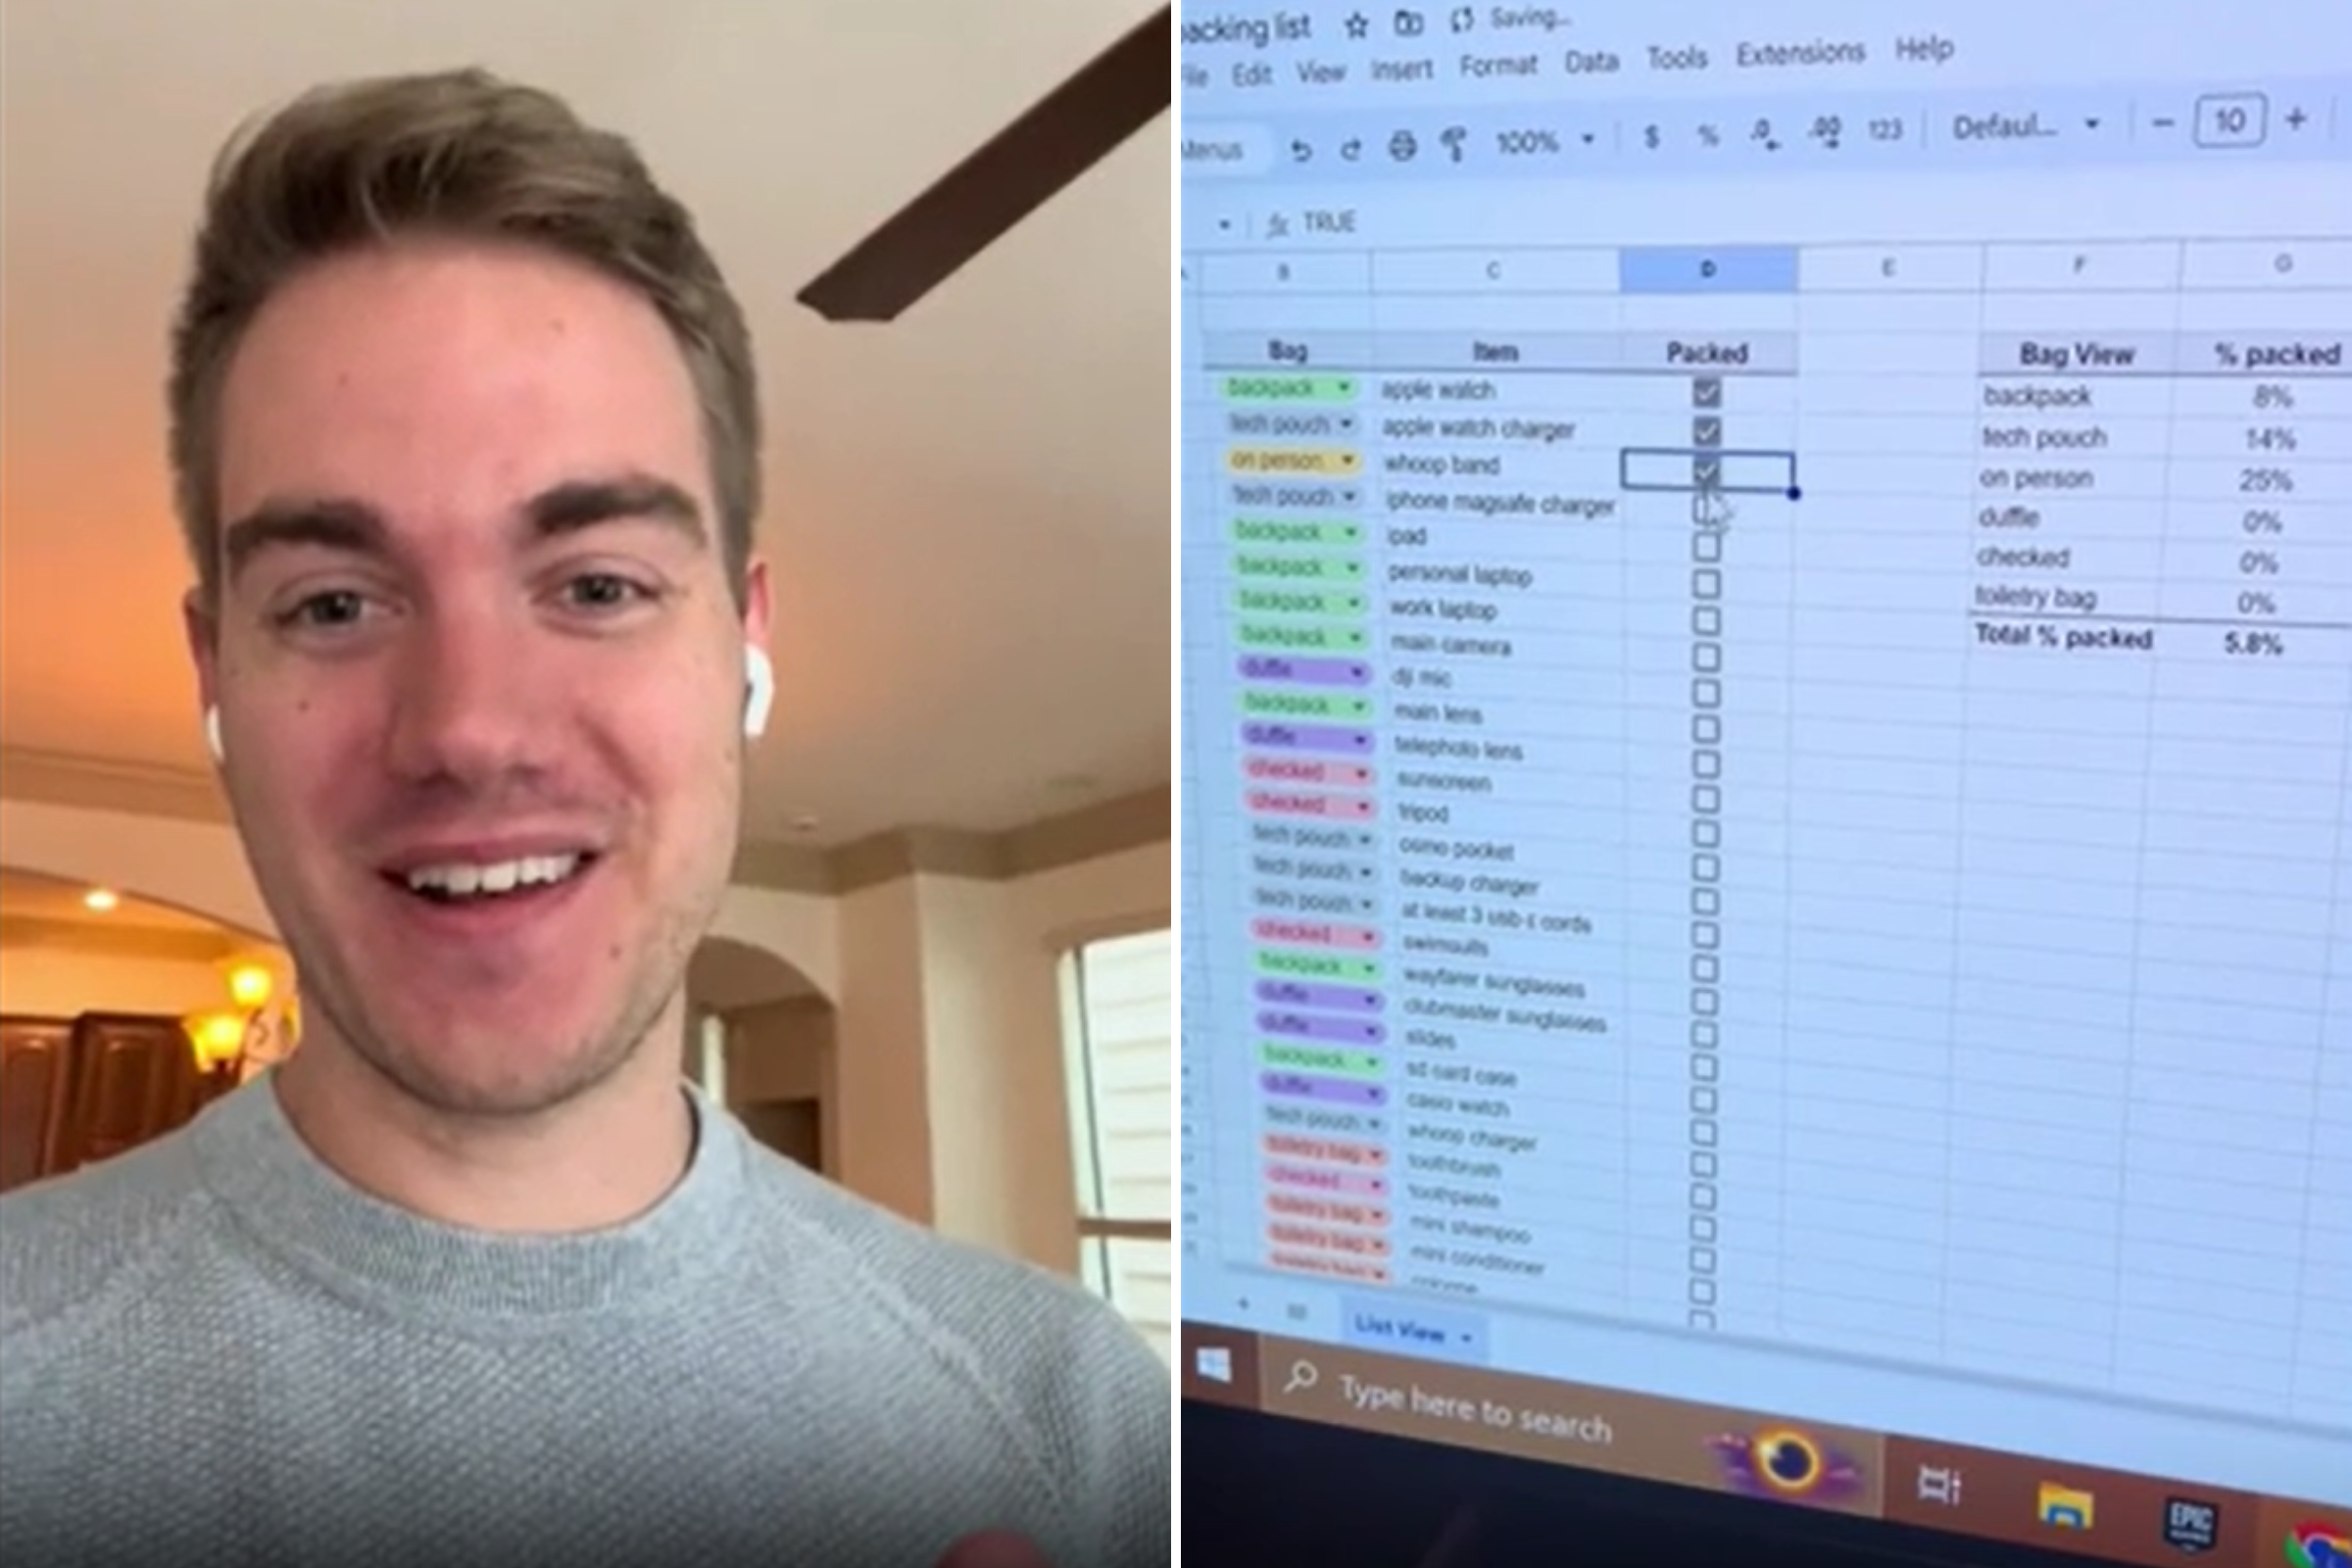 Man takes vacation planning to a new level with epic spreadsheet: “Normal?”